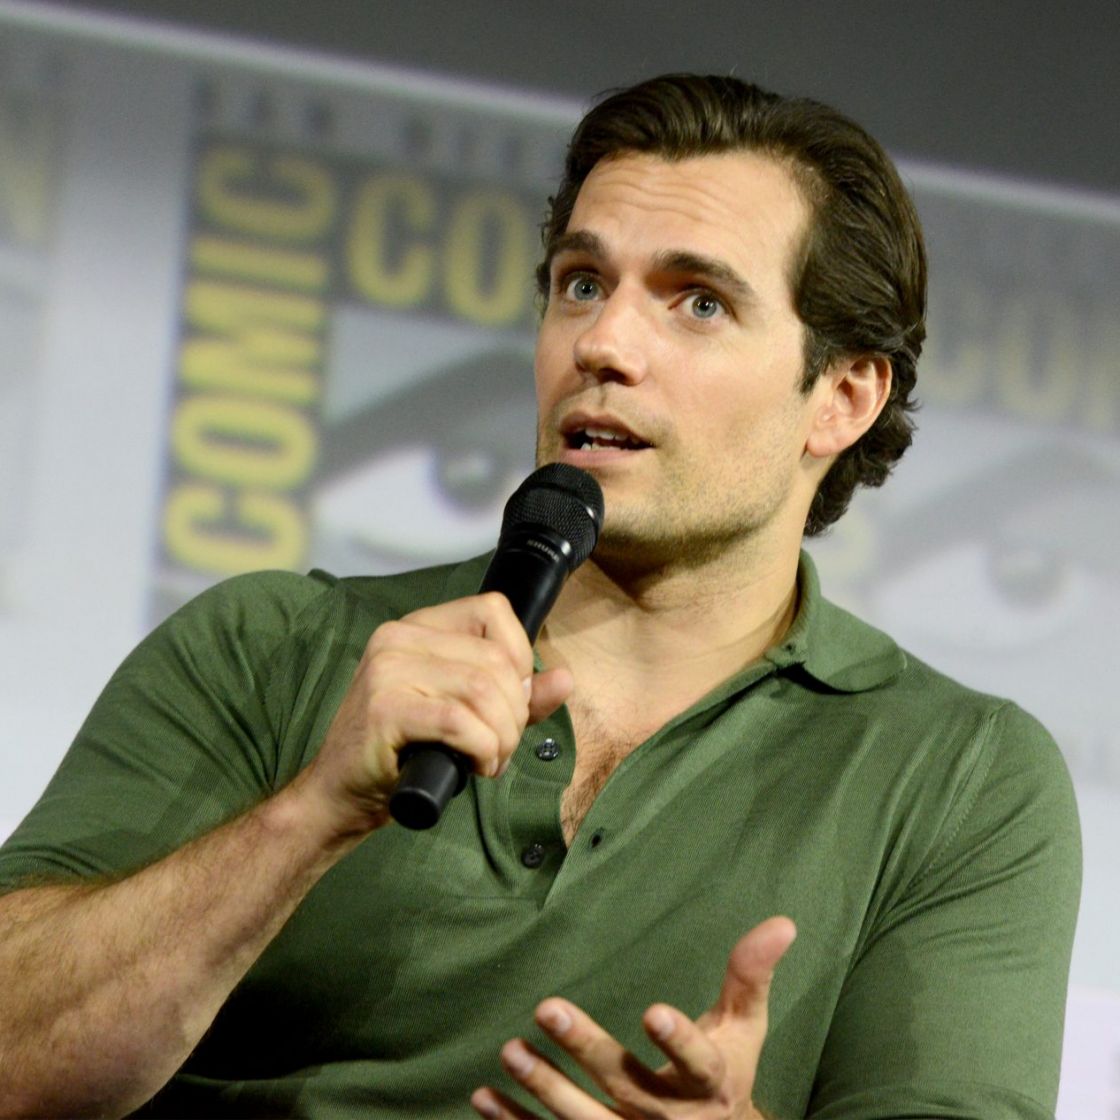 Henry Cavill and Natalie Viscuso Made Red Carpet Debut After Trolling